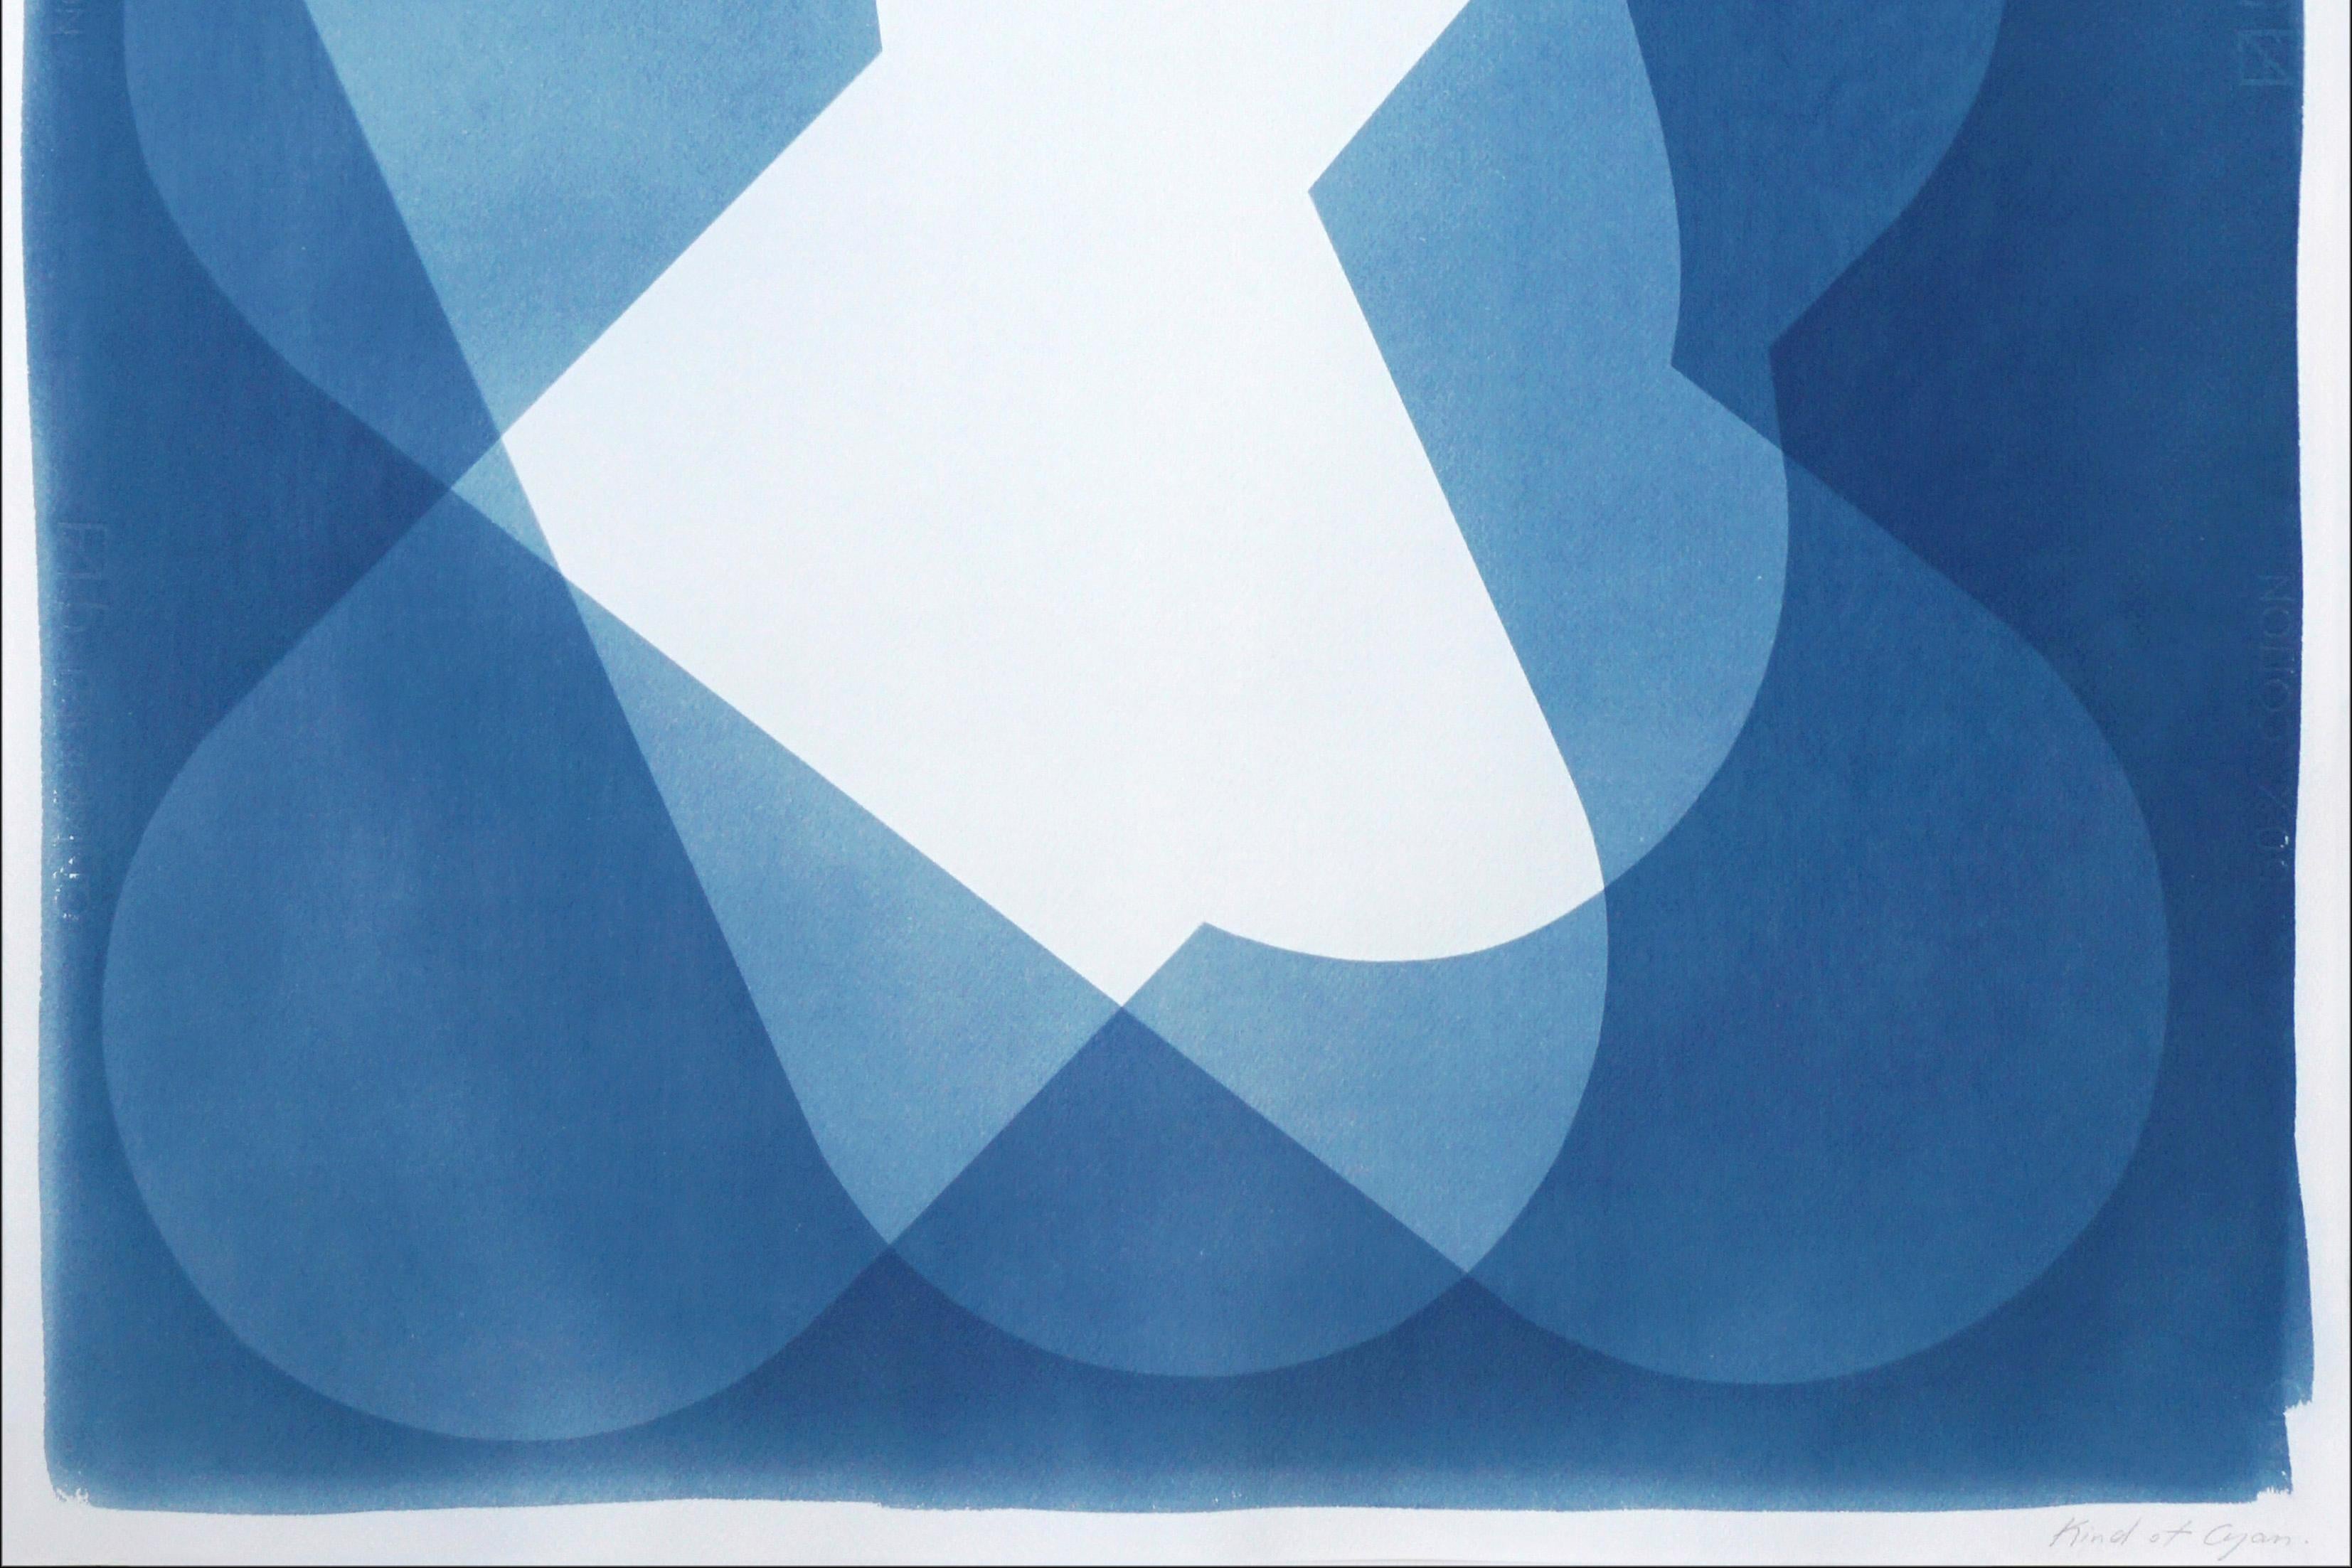 This is an exclusive handprinted unique cyanotype that takes its inspiration from the mid-century modern shapes.
It's made by layering paper cutouts and different exposures using uv-light. 

Details:
+ Title: Geometric Cloud
+ Year: 2022
+ Stamped